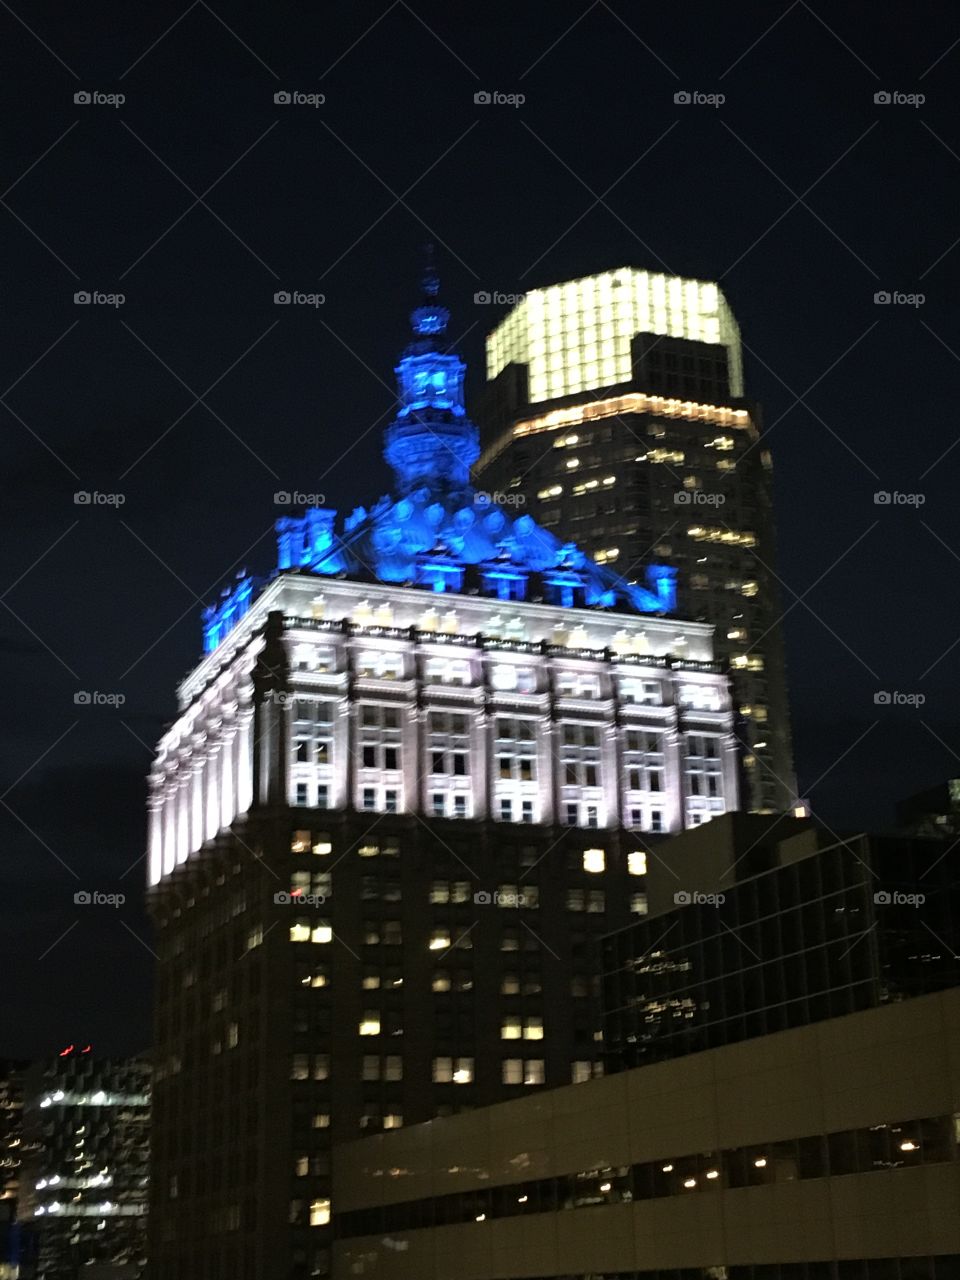 Watch the skyline light up the night. Blue and white illuminated building in city core. 